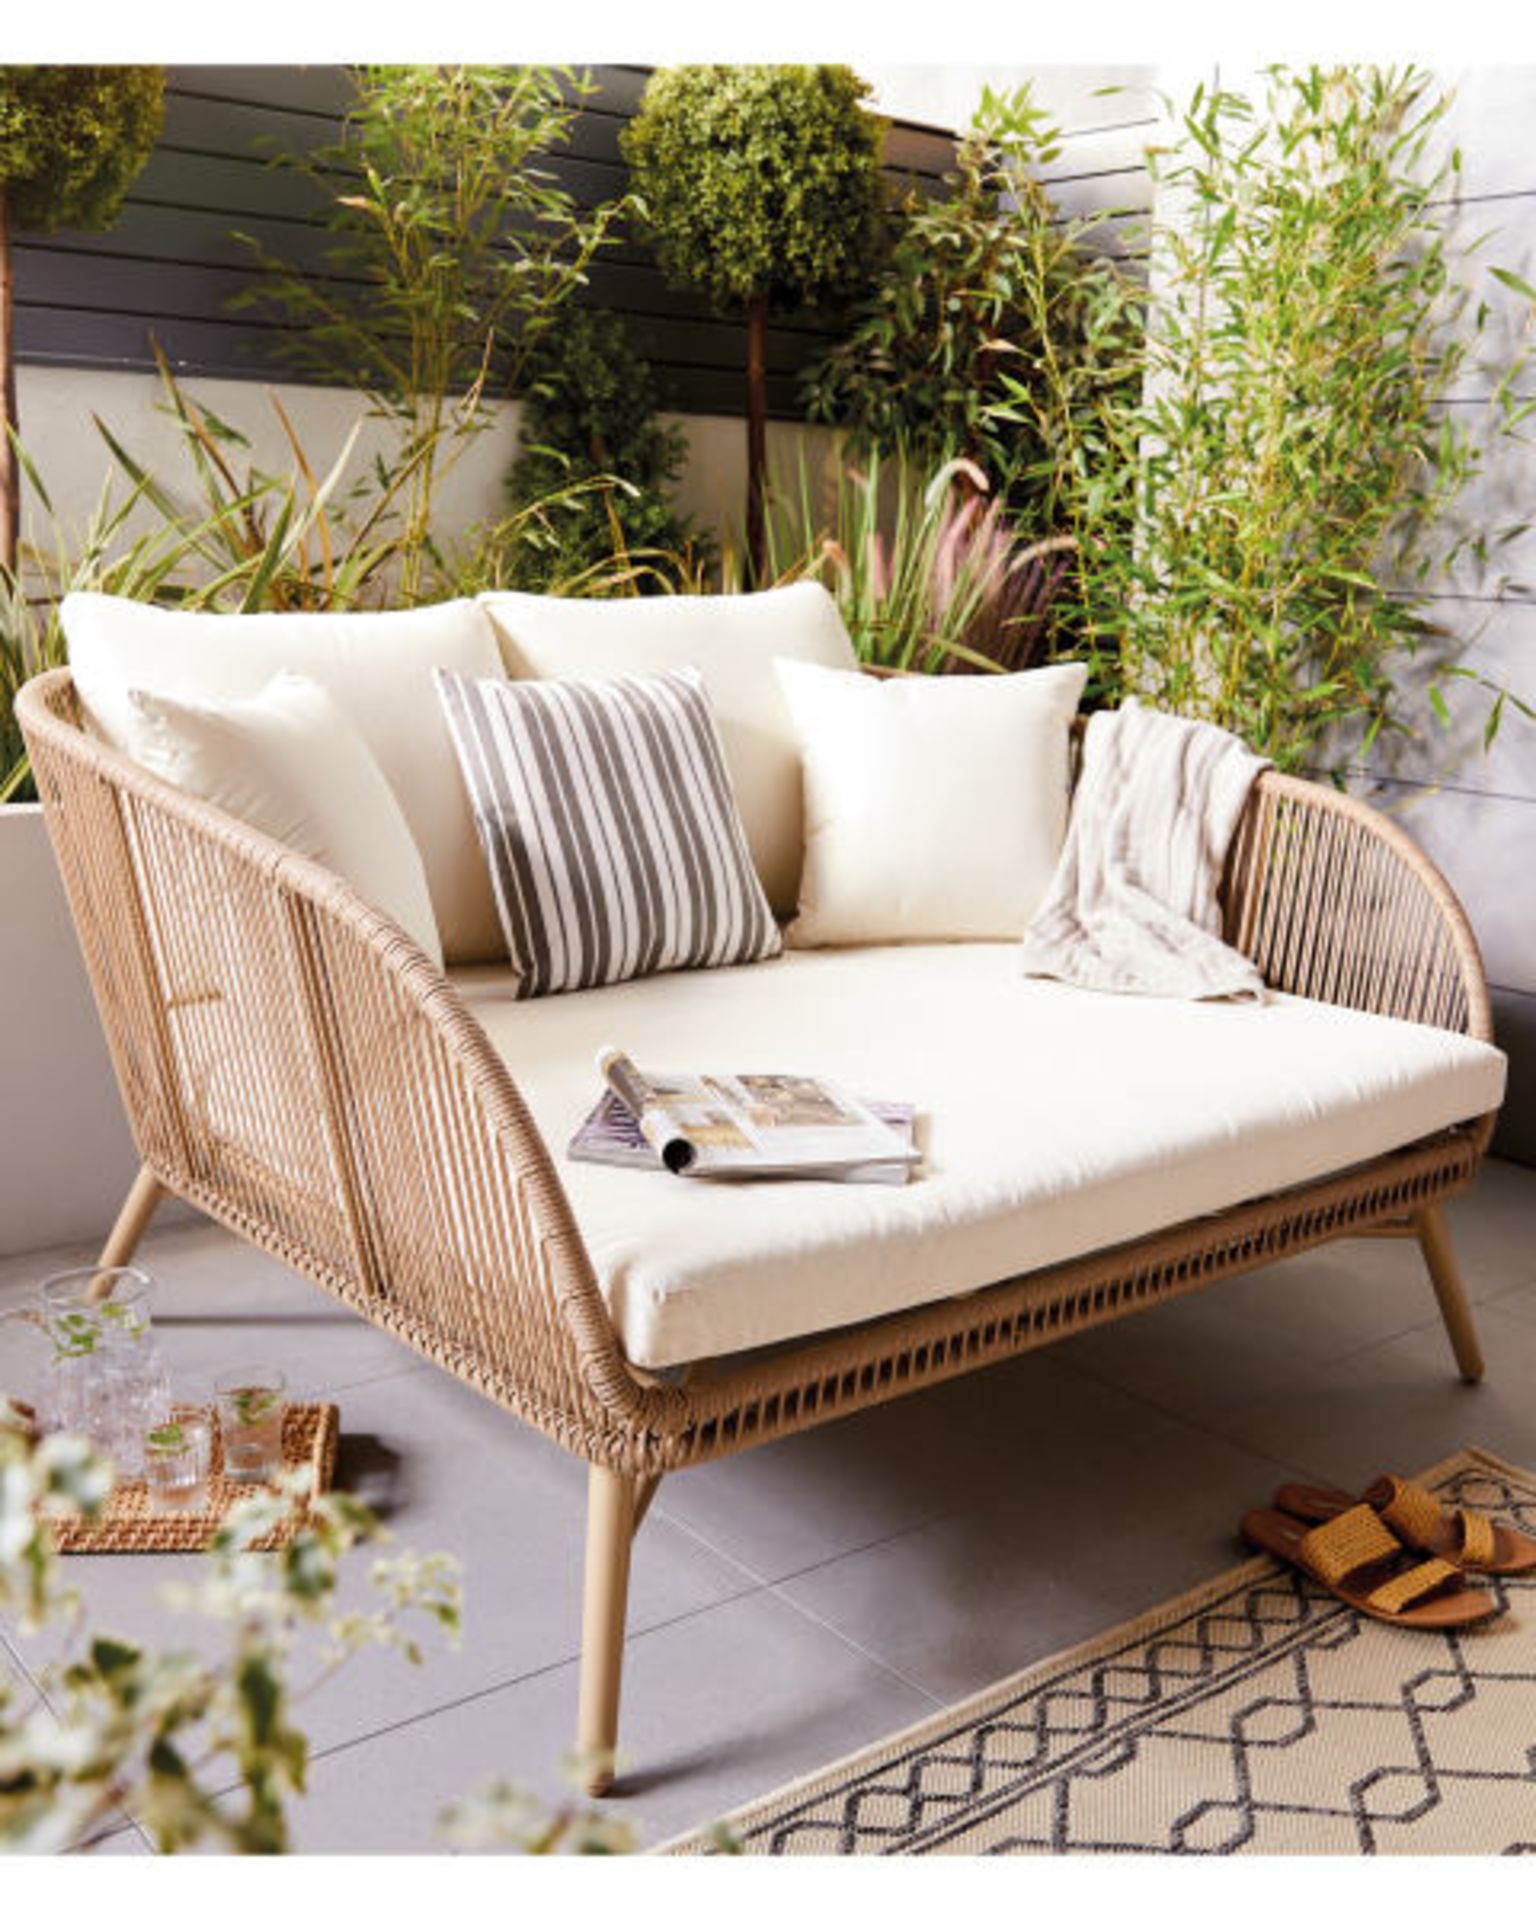 Luxury Rope Effect Snug Seat. Enjoy those lazy days in the garden with this comfortable and